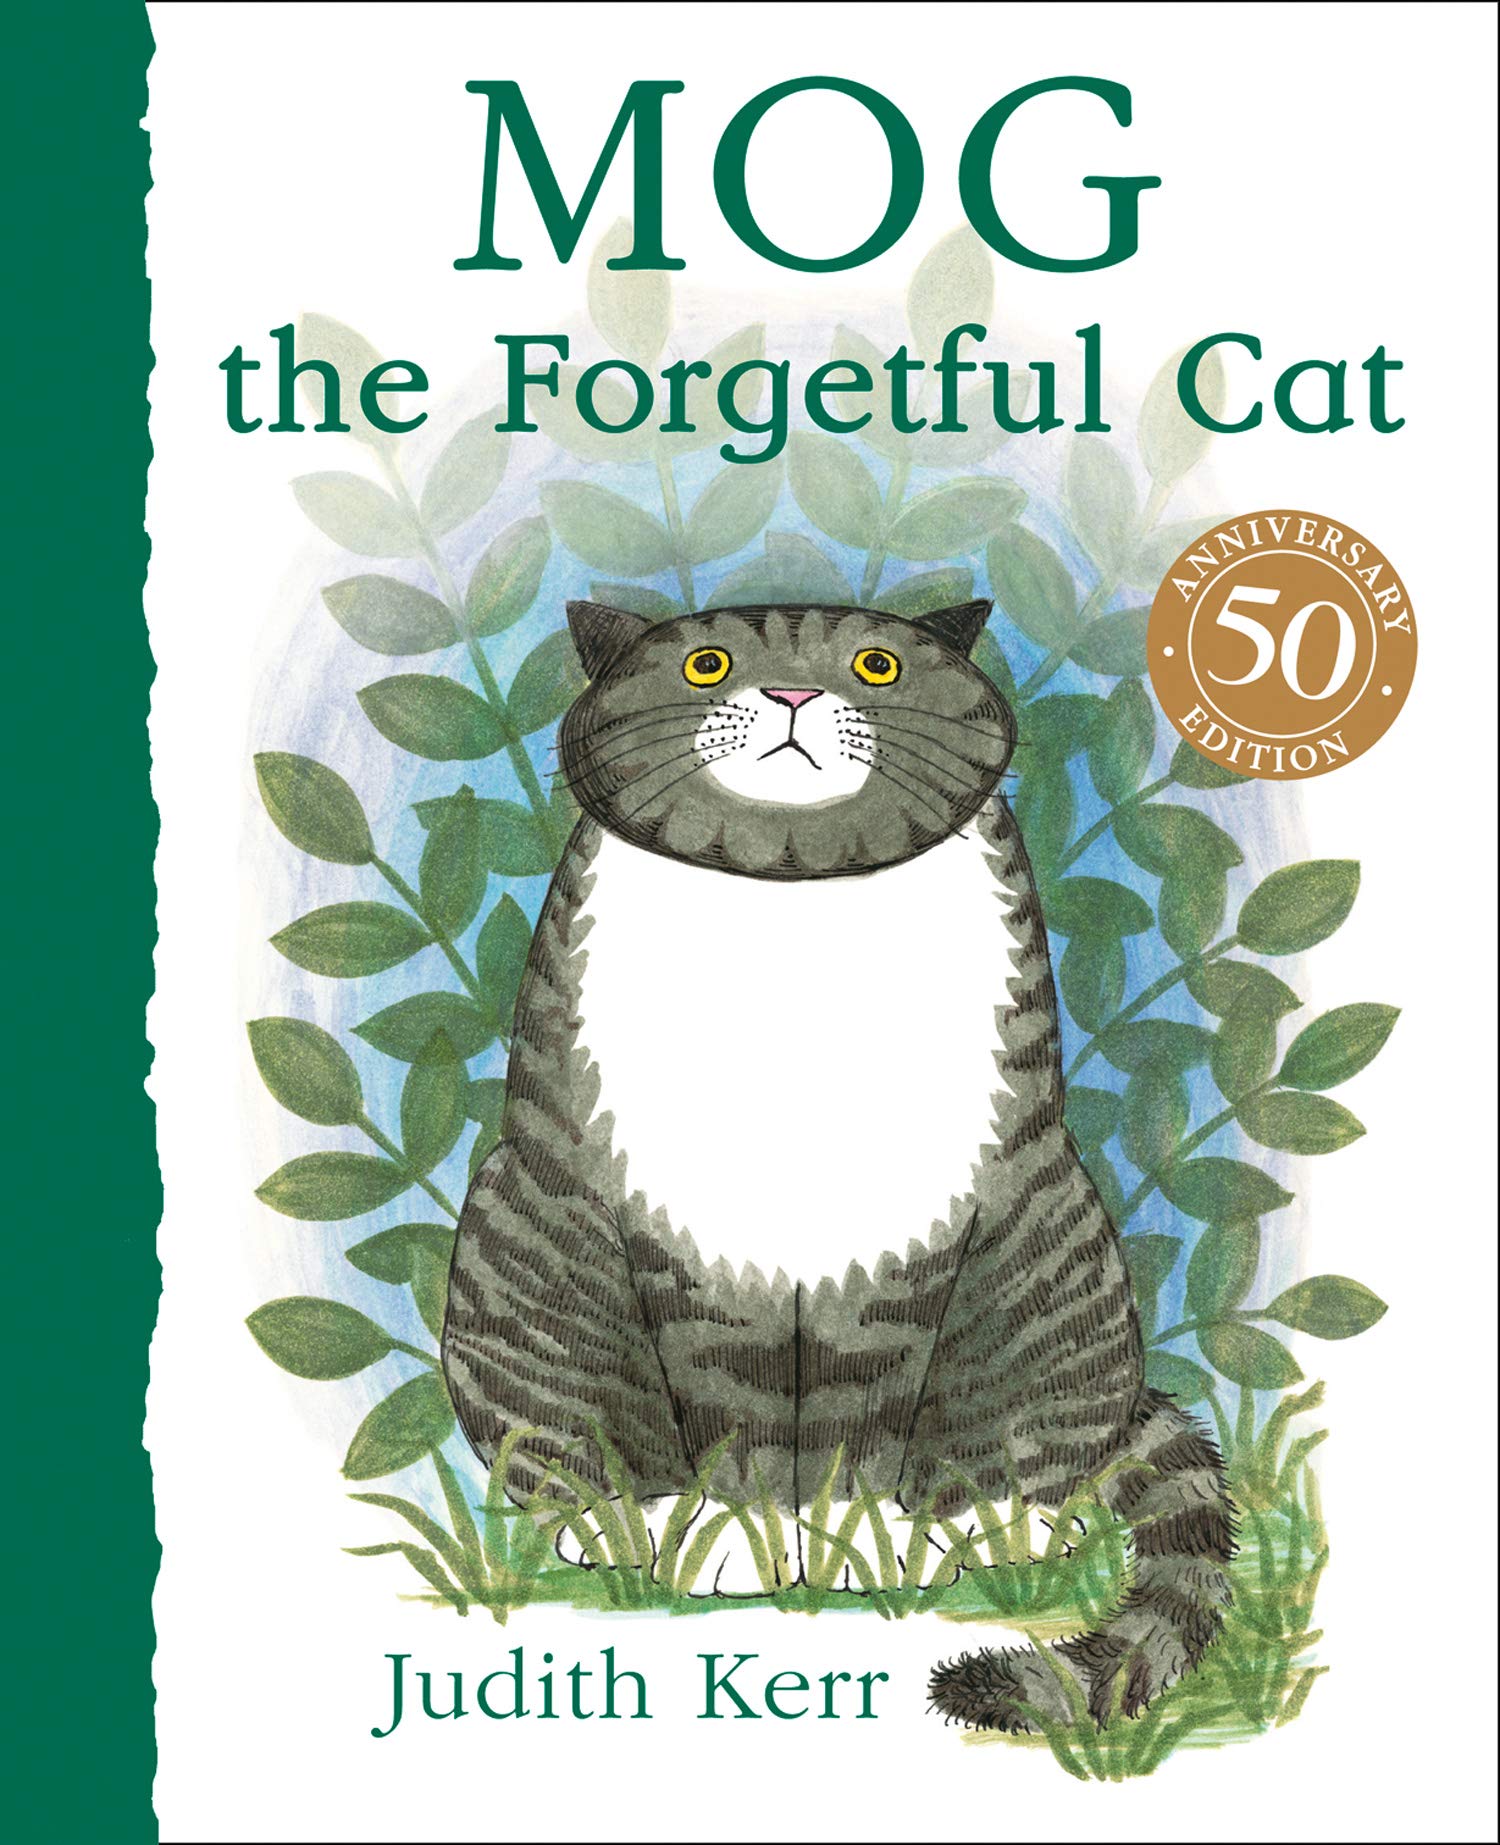 Mog the Forgetful Cat (50th BRDBK A) [Hardcover]